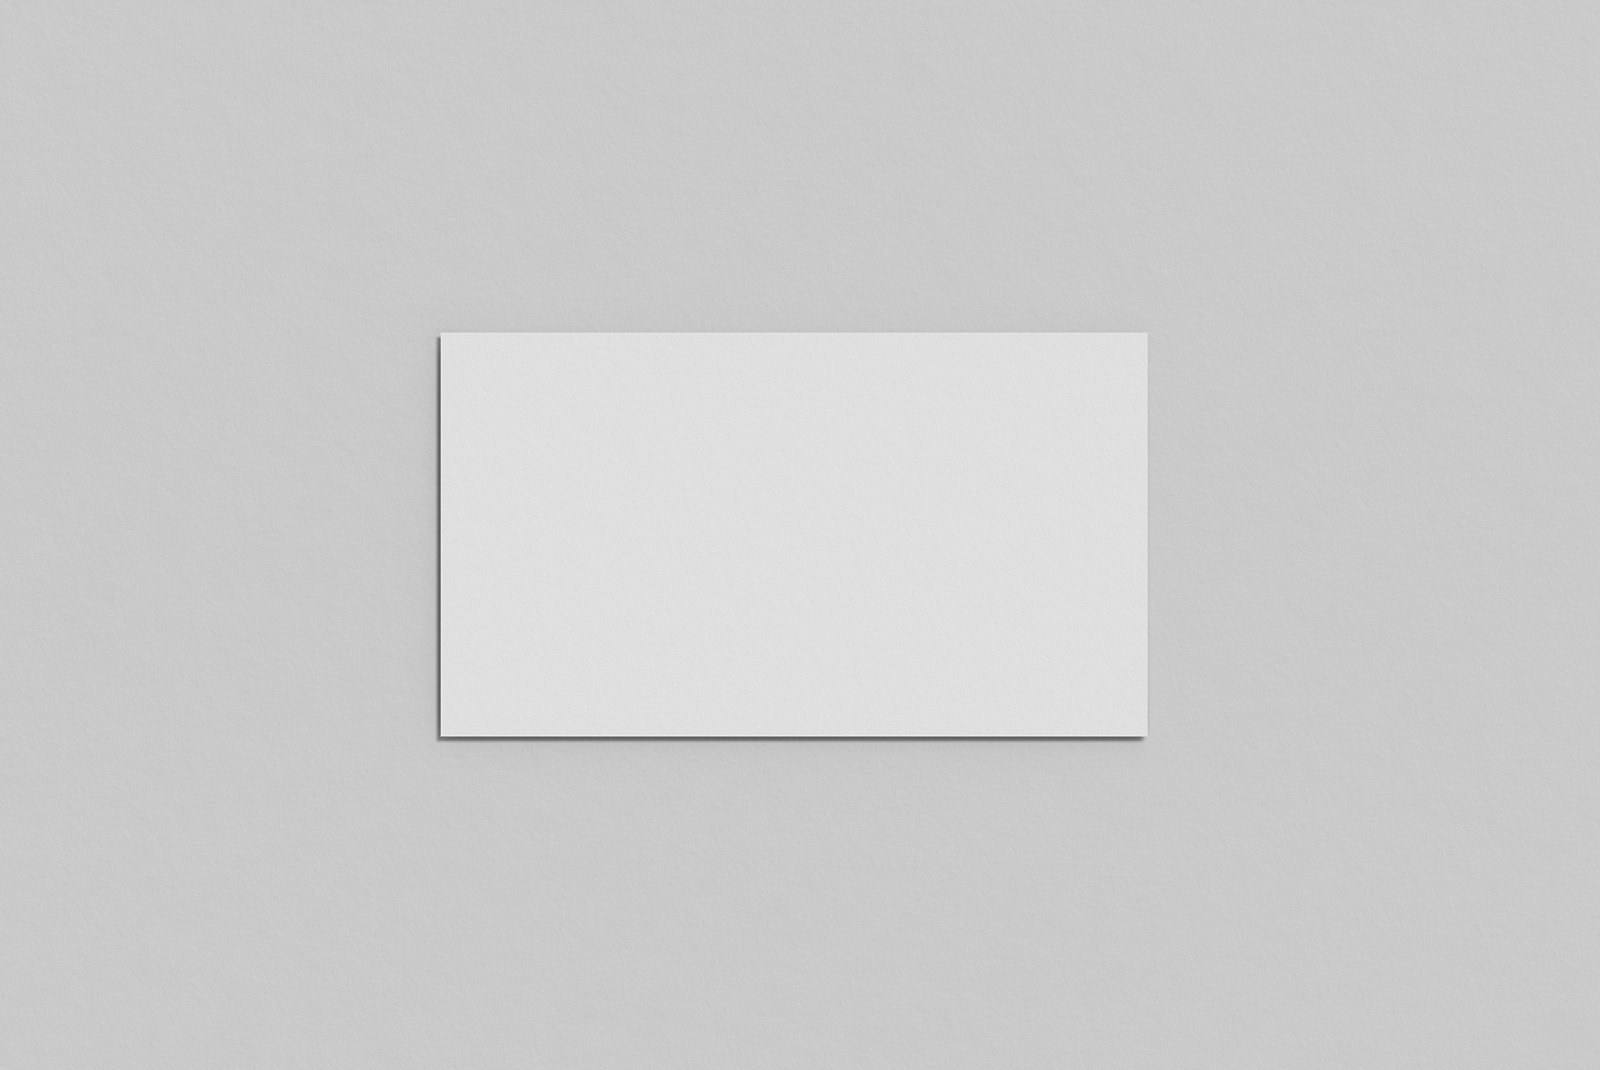 Minimalist blank square paper mockup on a textured grey background for graphic design presentation and portfolio.